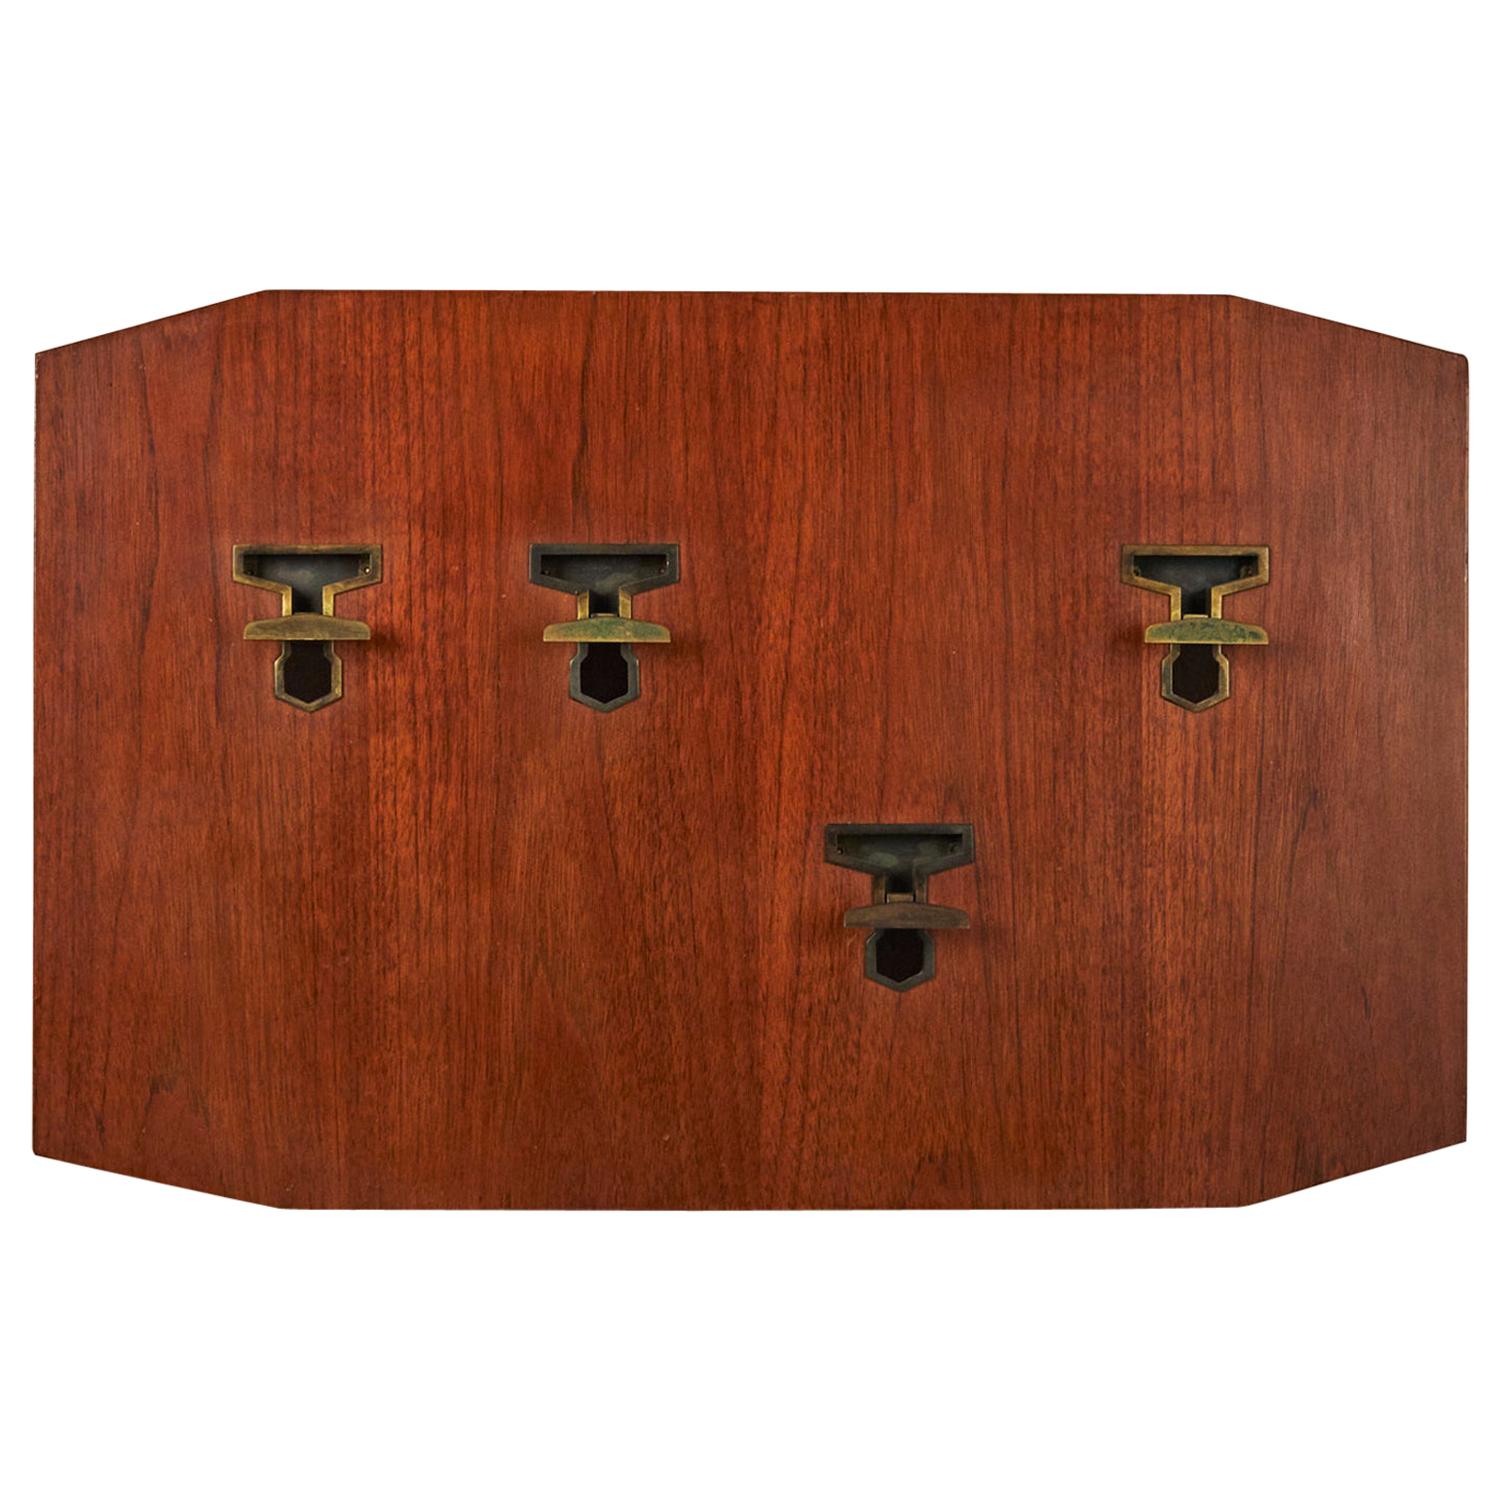 Teak Wood and Brass Coat Rack by Melchiorre Bega from the Late 1950's